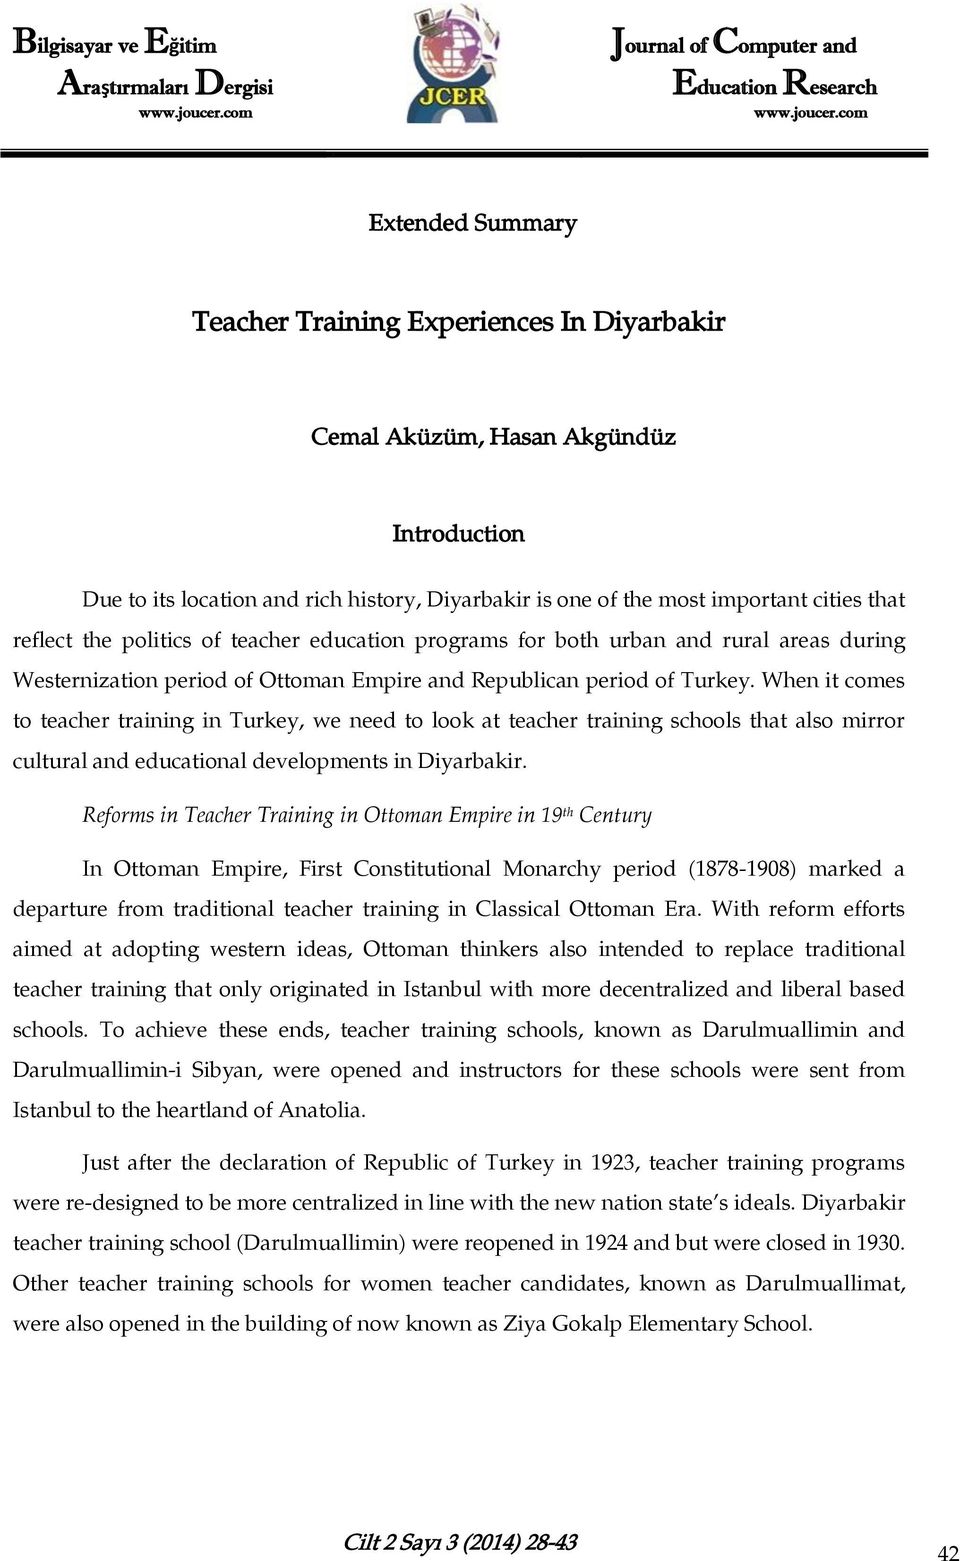 When it comes to teacher training in Turkey, we need to look at teacher training schools that also mirror cultural and educational developments in Diyarbakir.